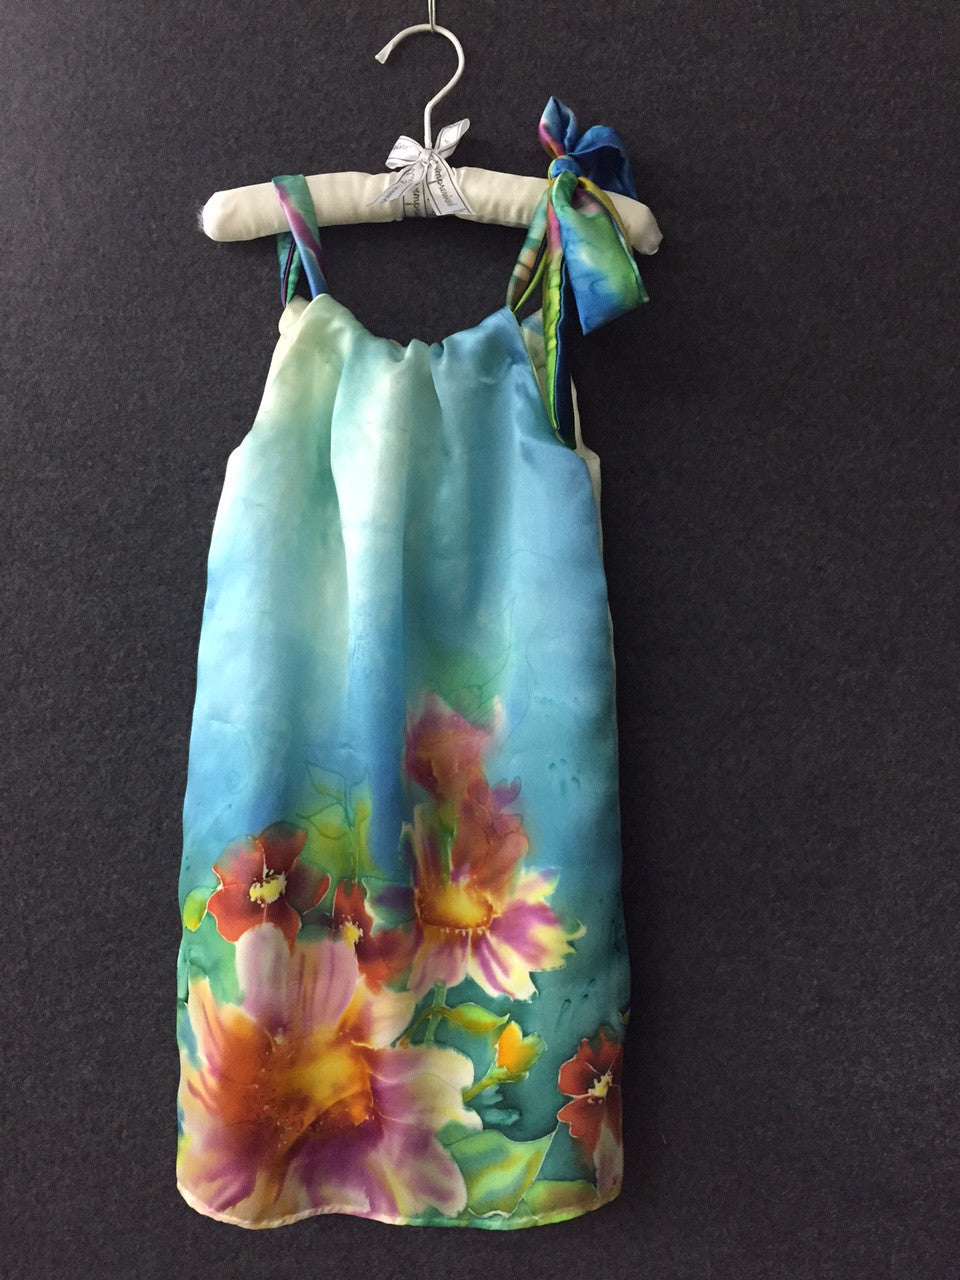 New line added to the site - Silk painted girls dresses